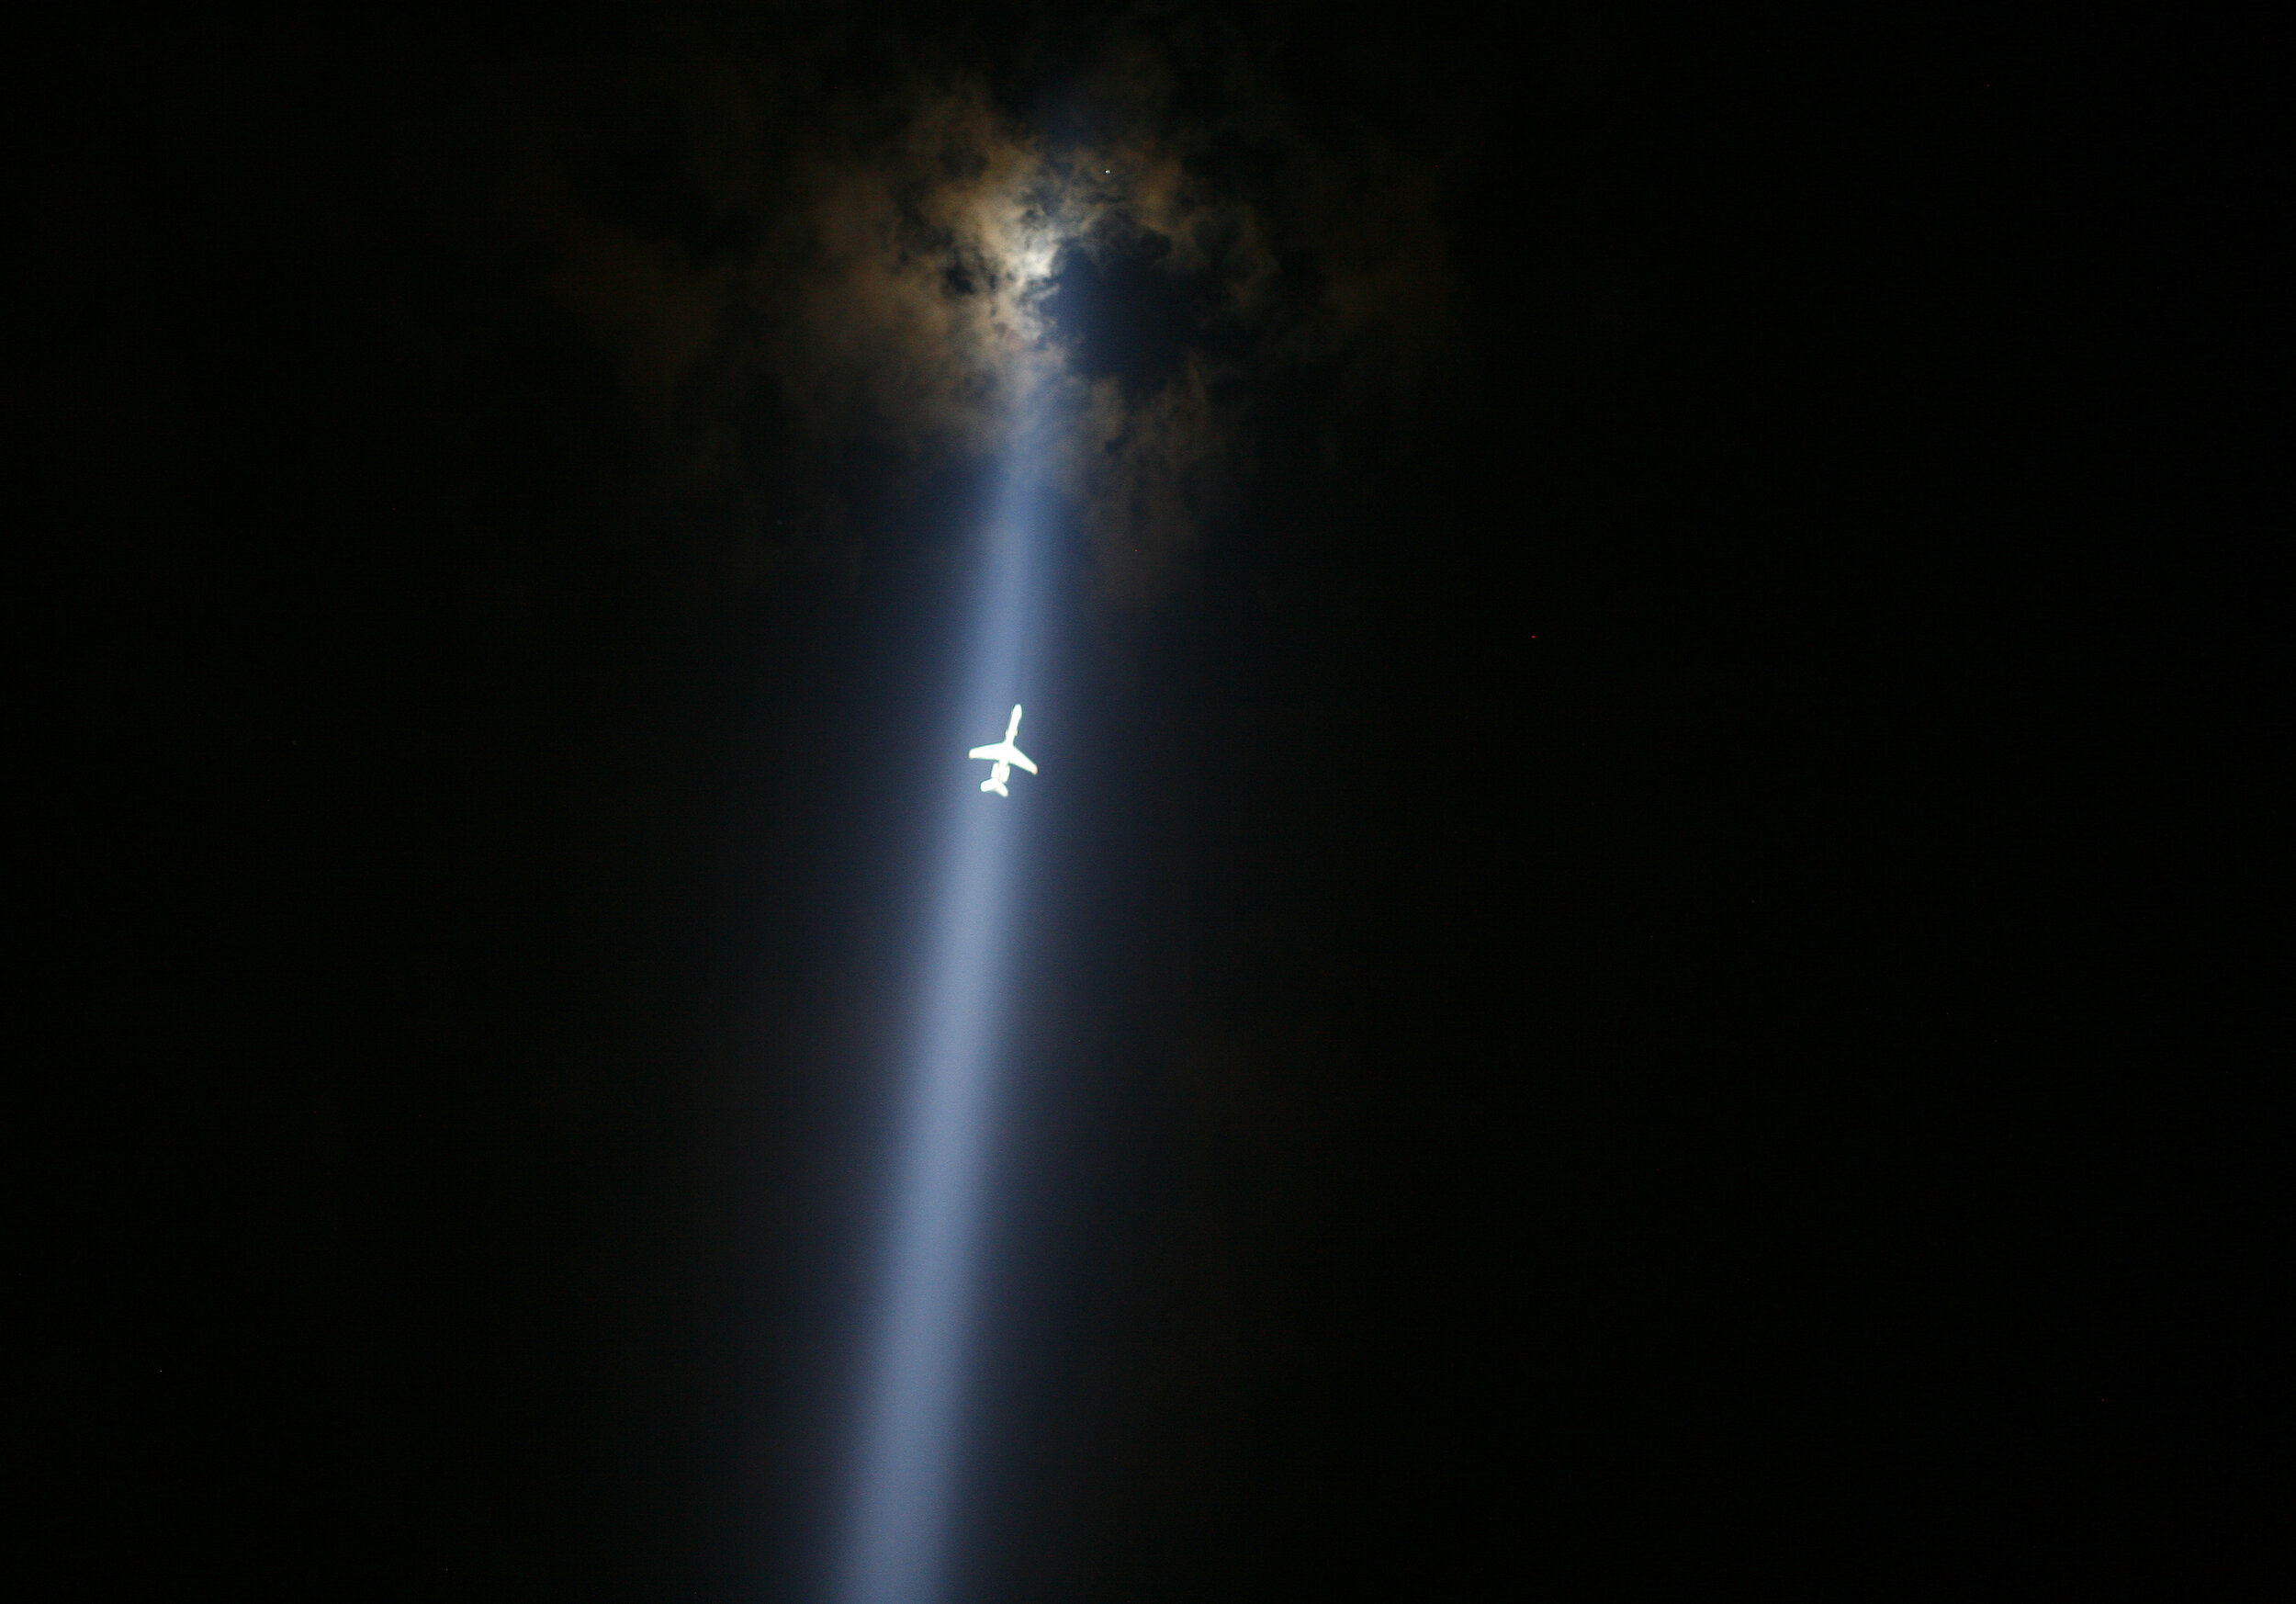   A plane flies through the Tribute in Lights. Ten year anniversary of 9/11. New York, NY. 2011  